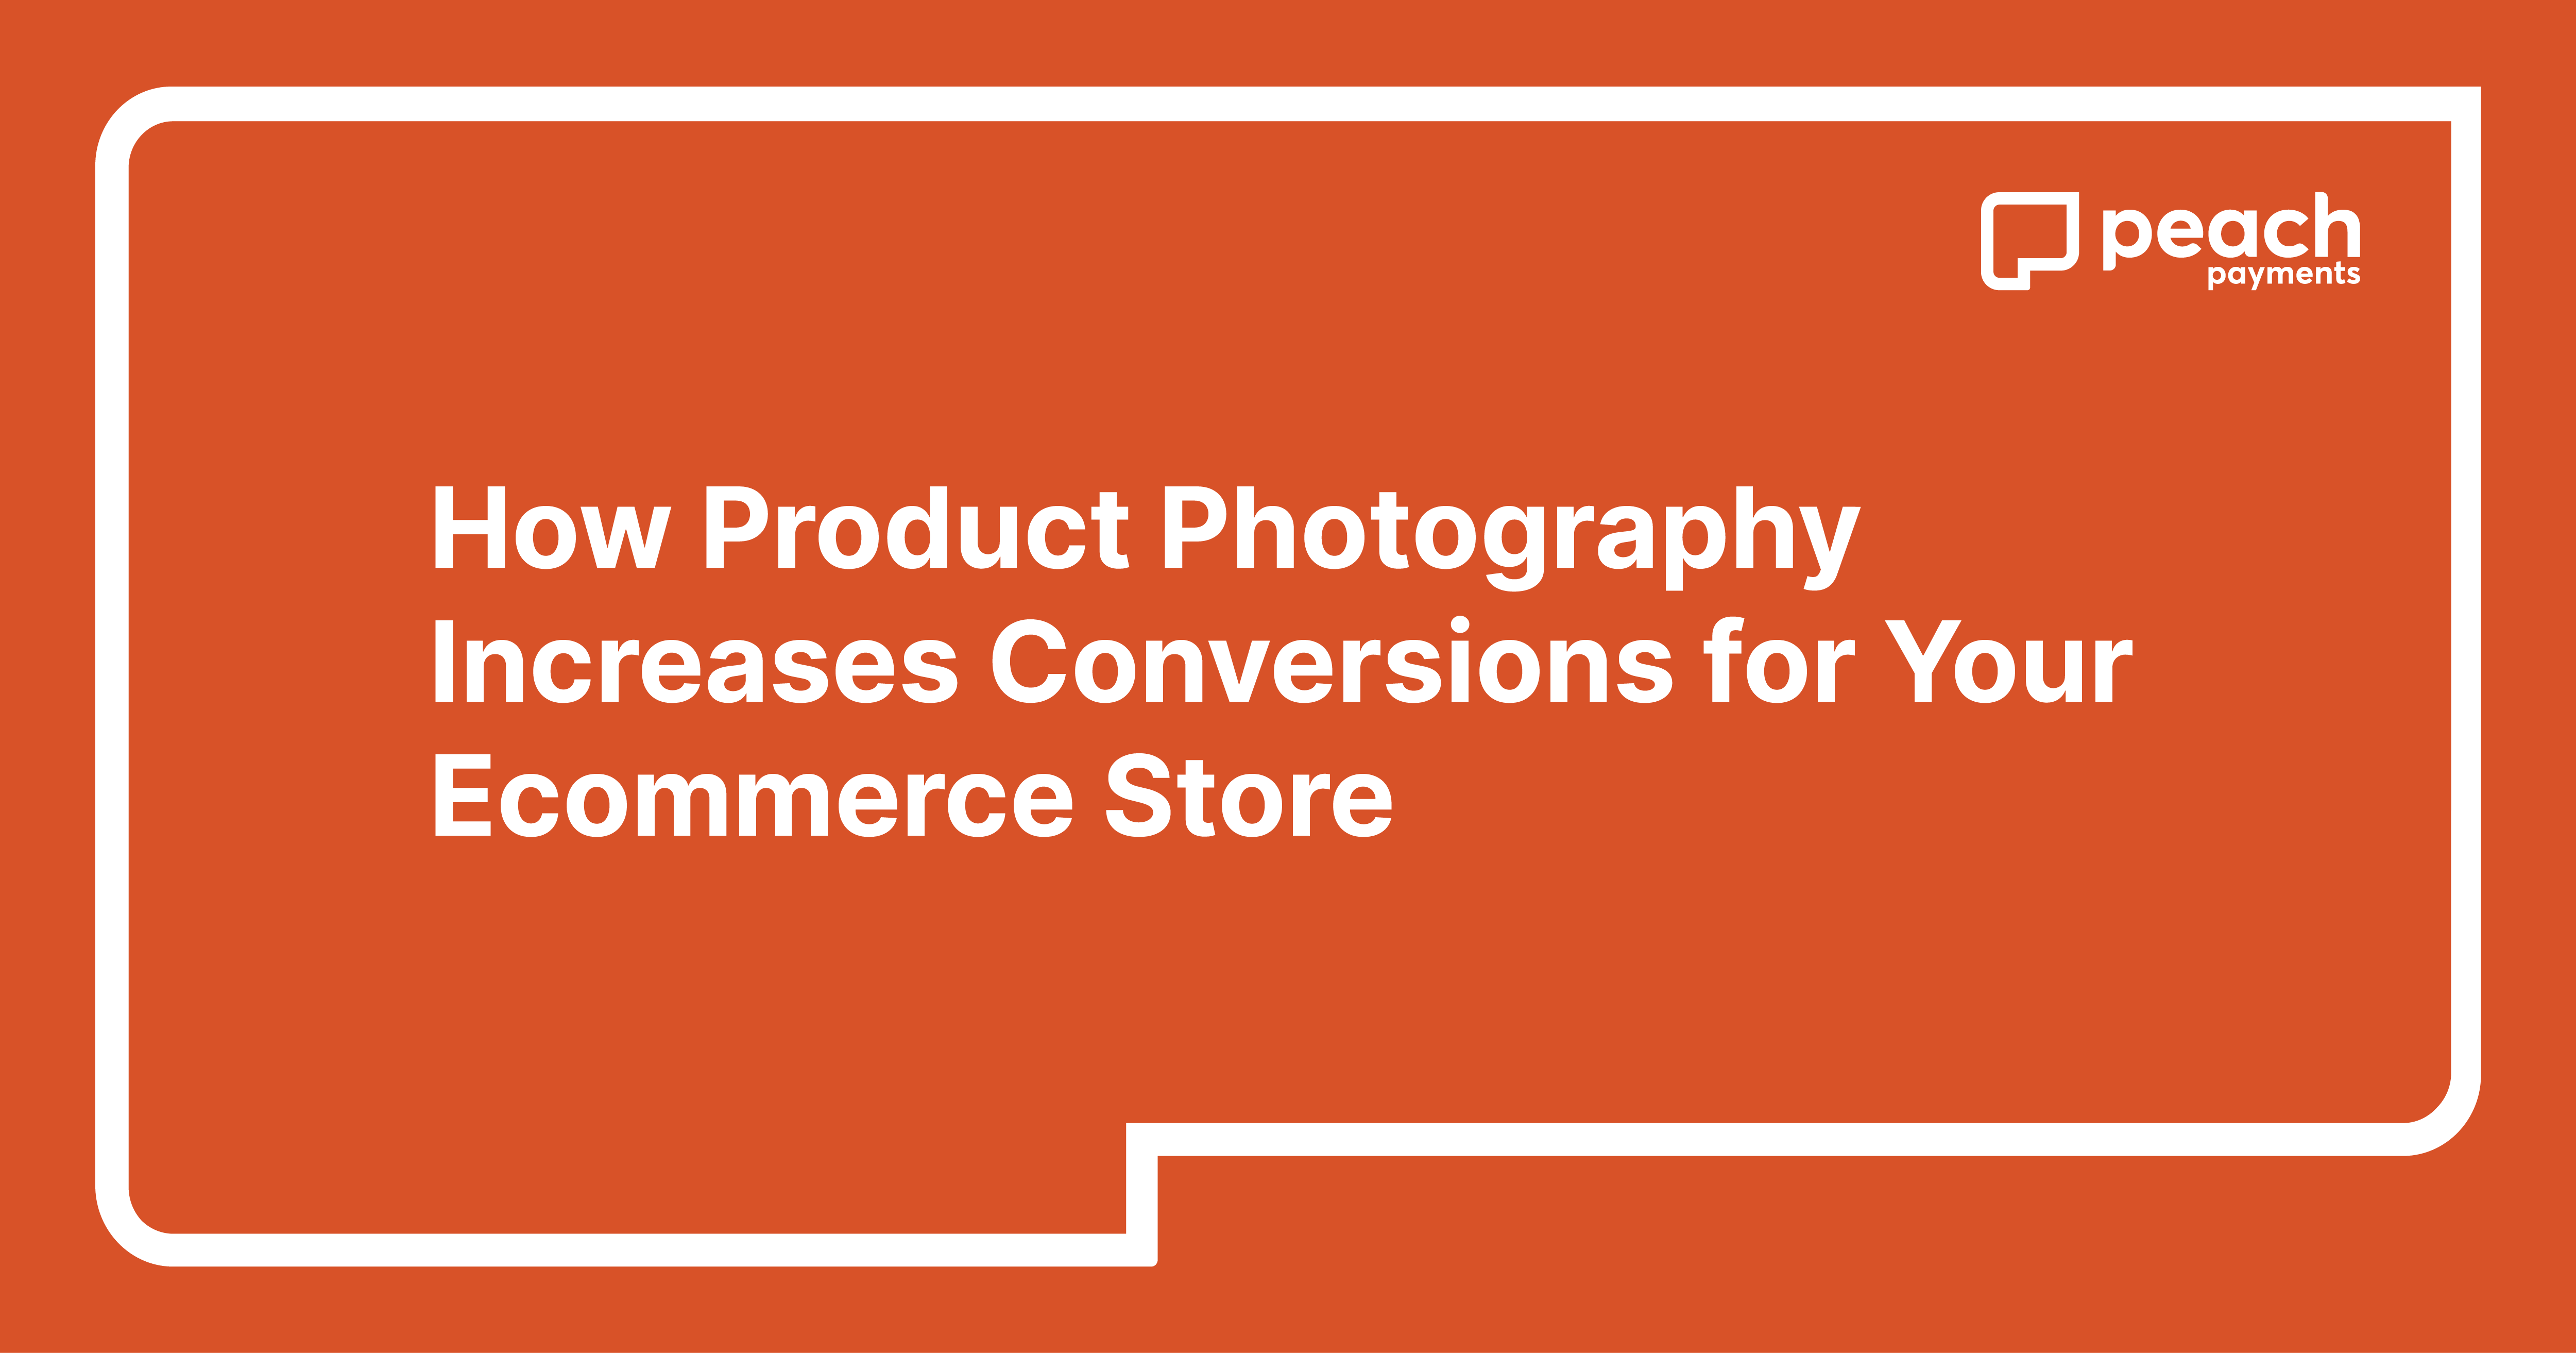 How product photography increases conversions for your ecommerce store